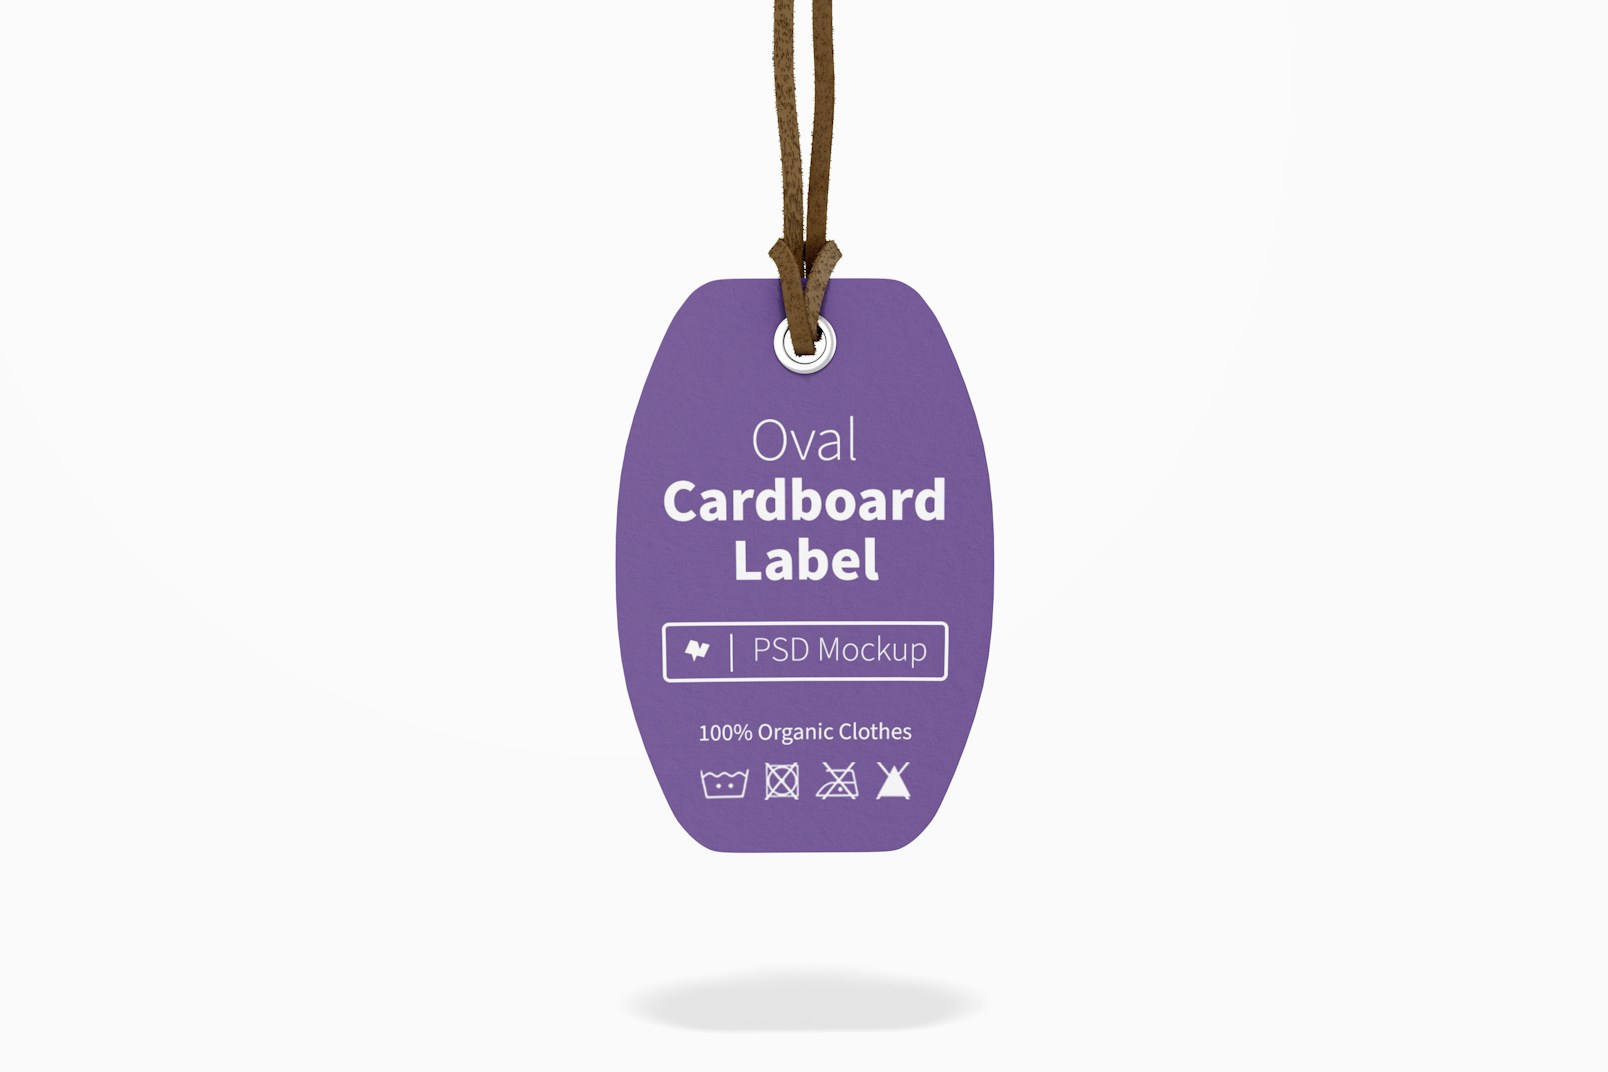 Oval Cardboard Label with Leather Rope Mockup